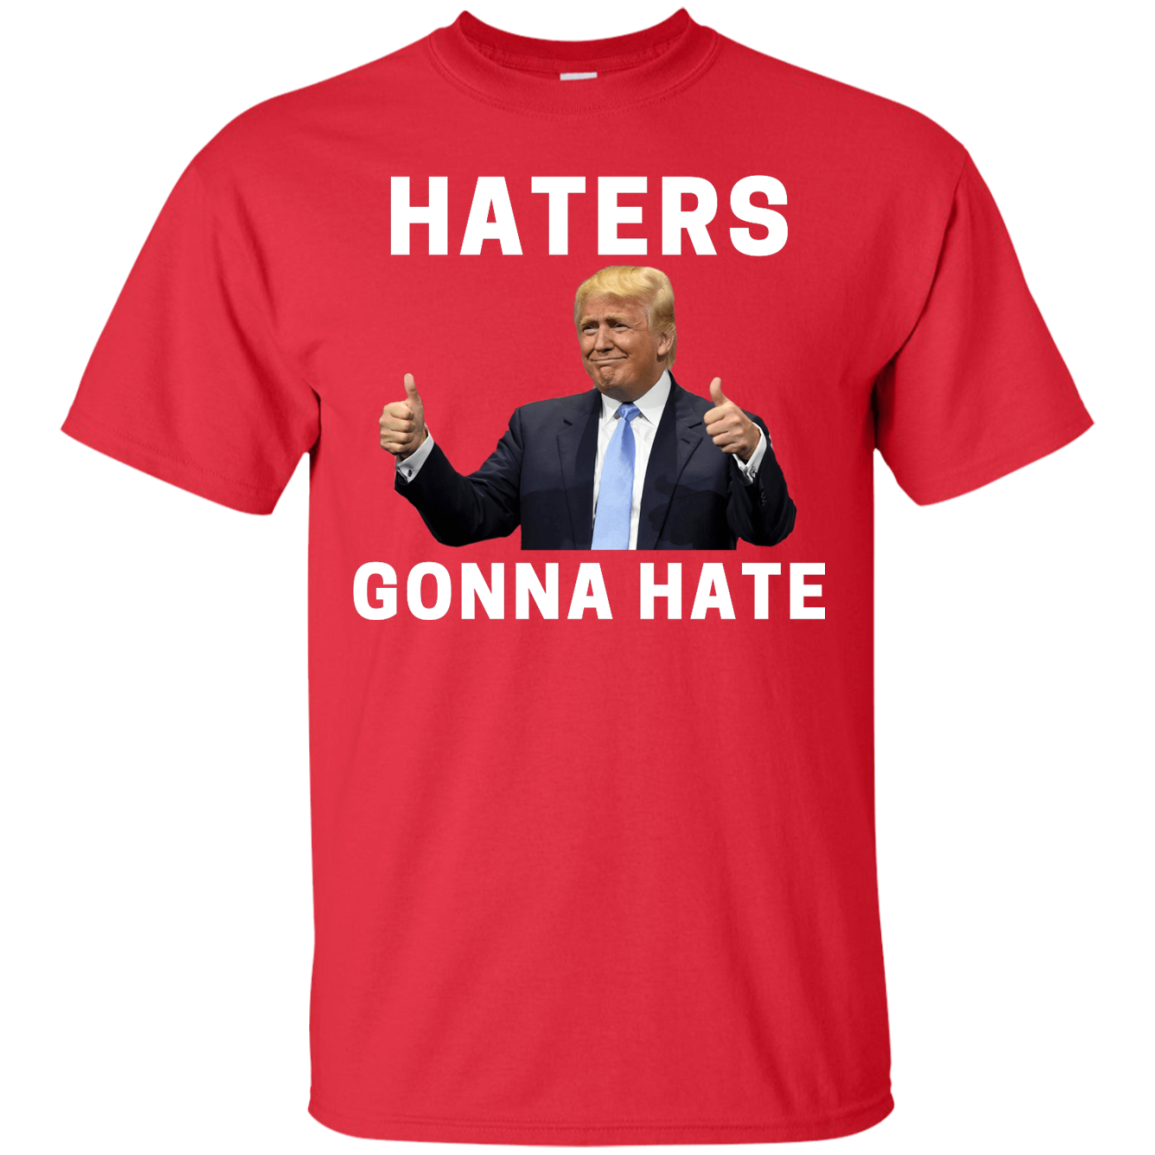 Haters Gonna Hate Trump